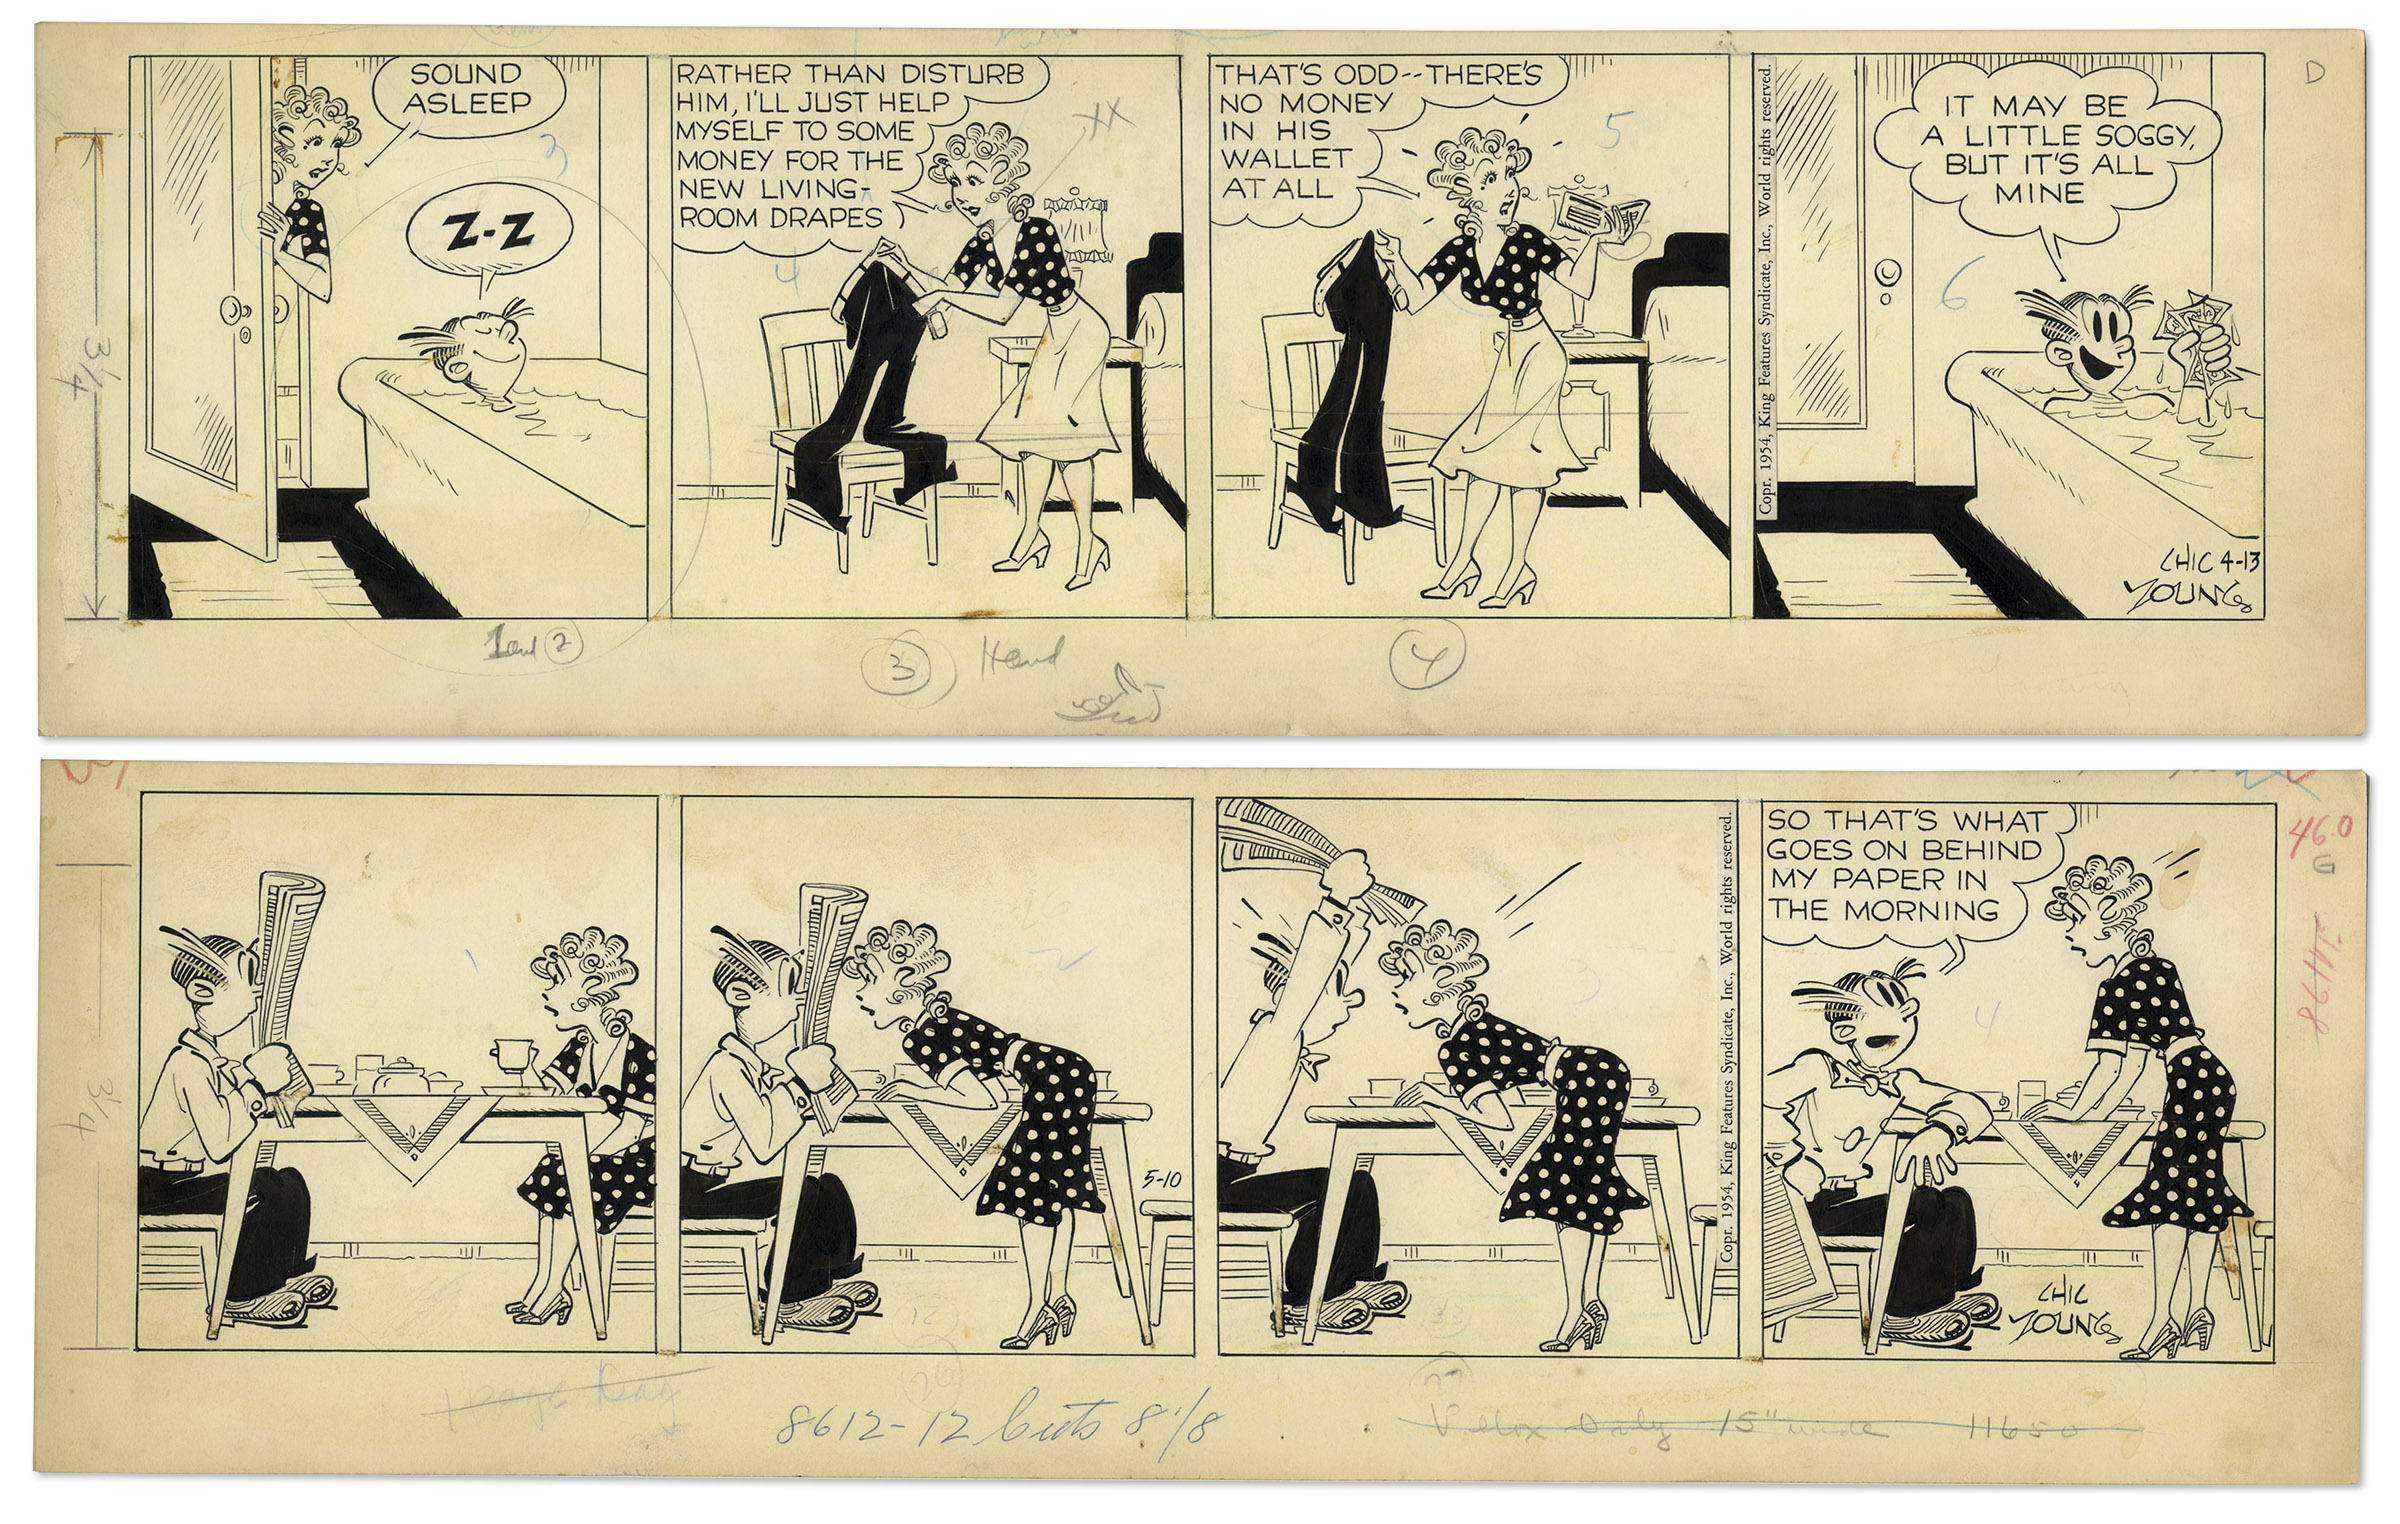 ''Blondie'' comic strips hand-drawn and signed by Chic Young from 13 April 1954 and 10 May 1954.